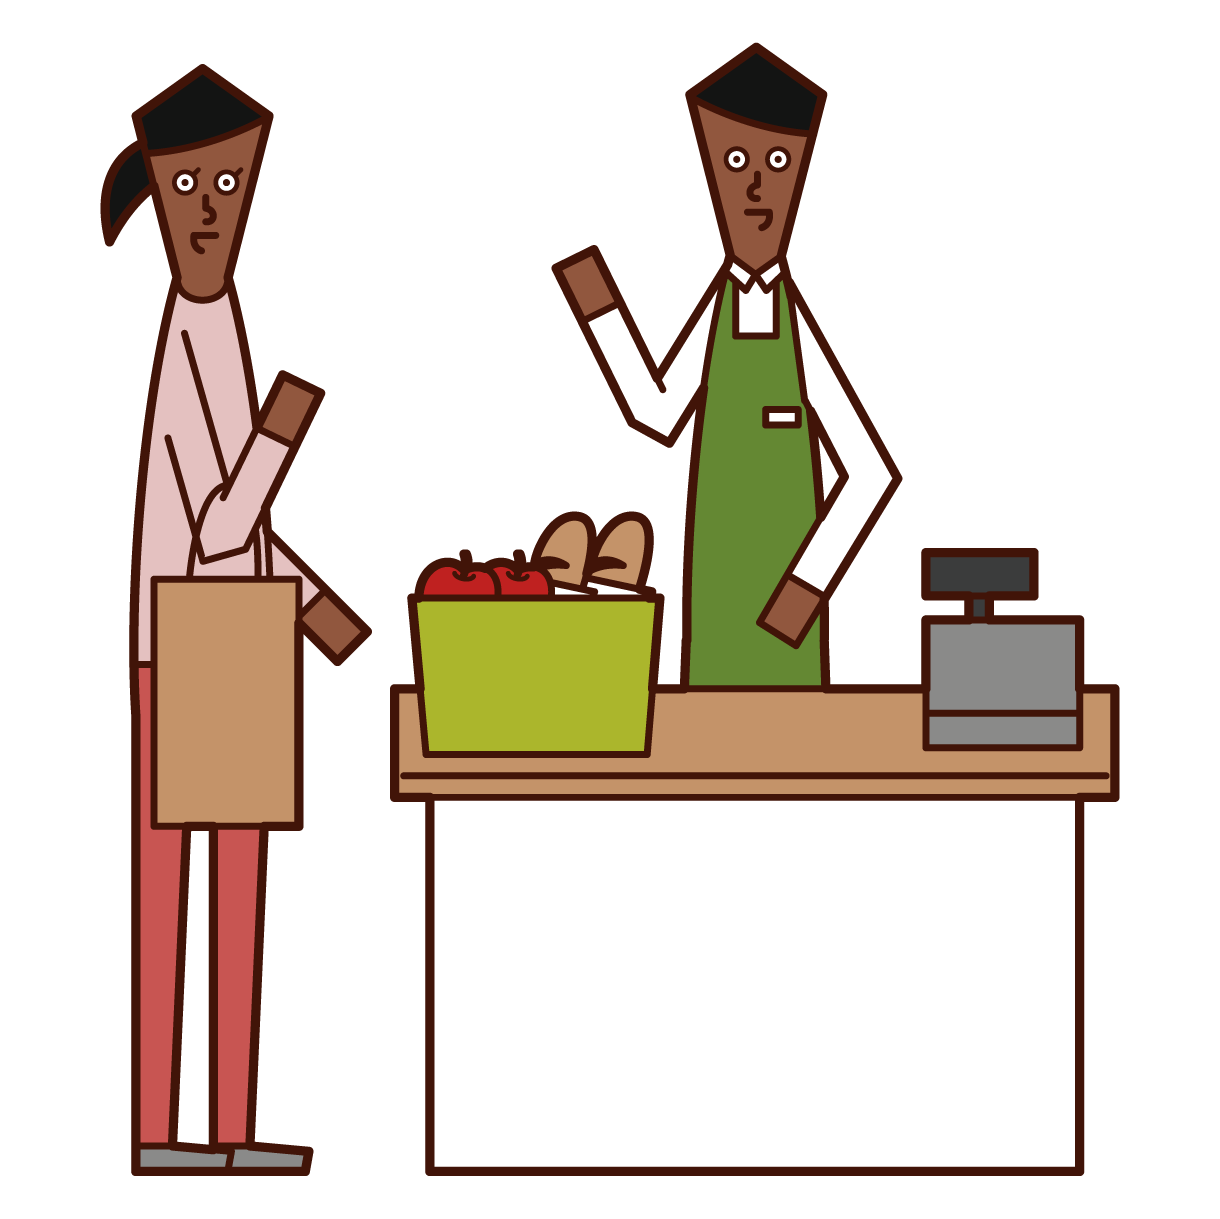 Illustration of a clerk (man) accounting at the cash register